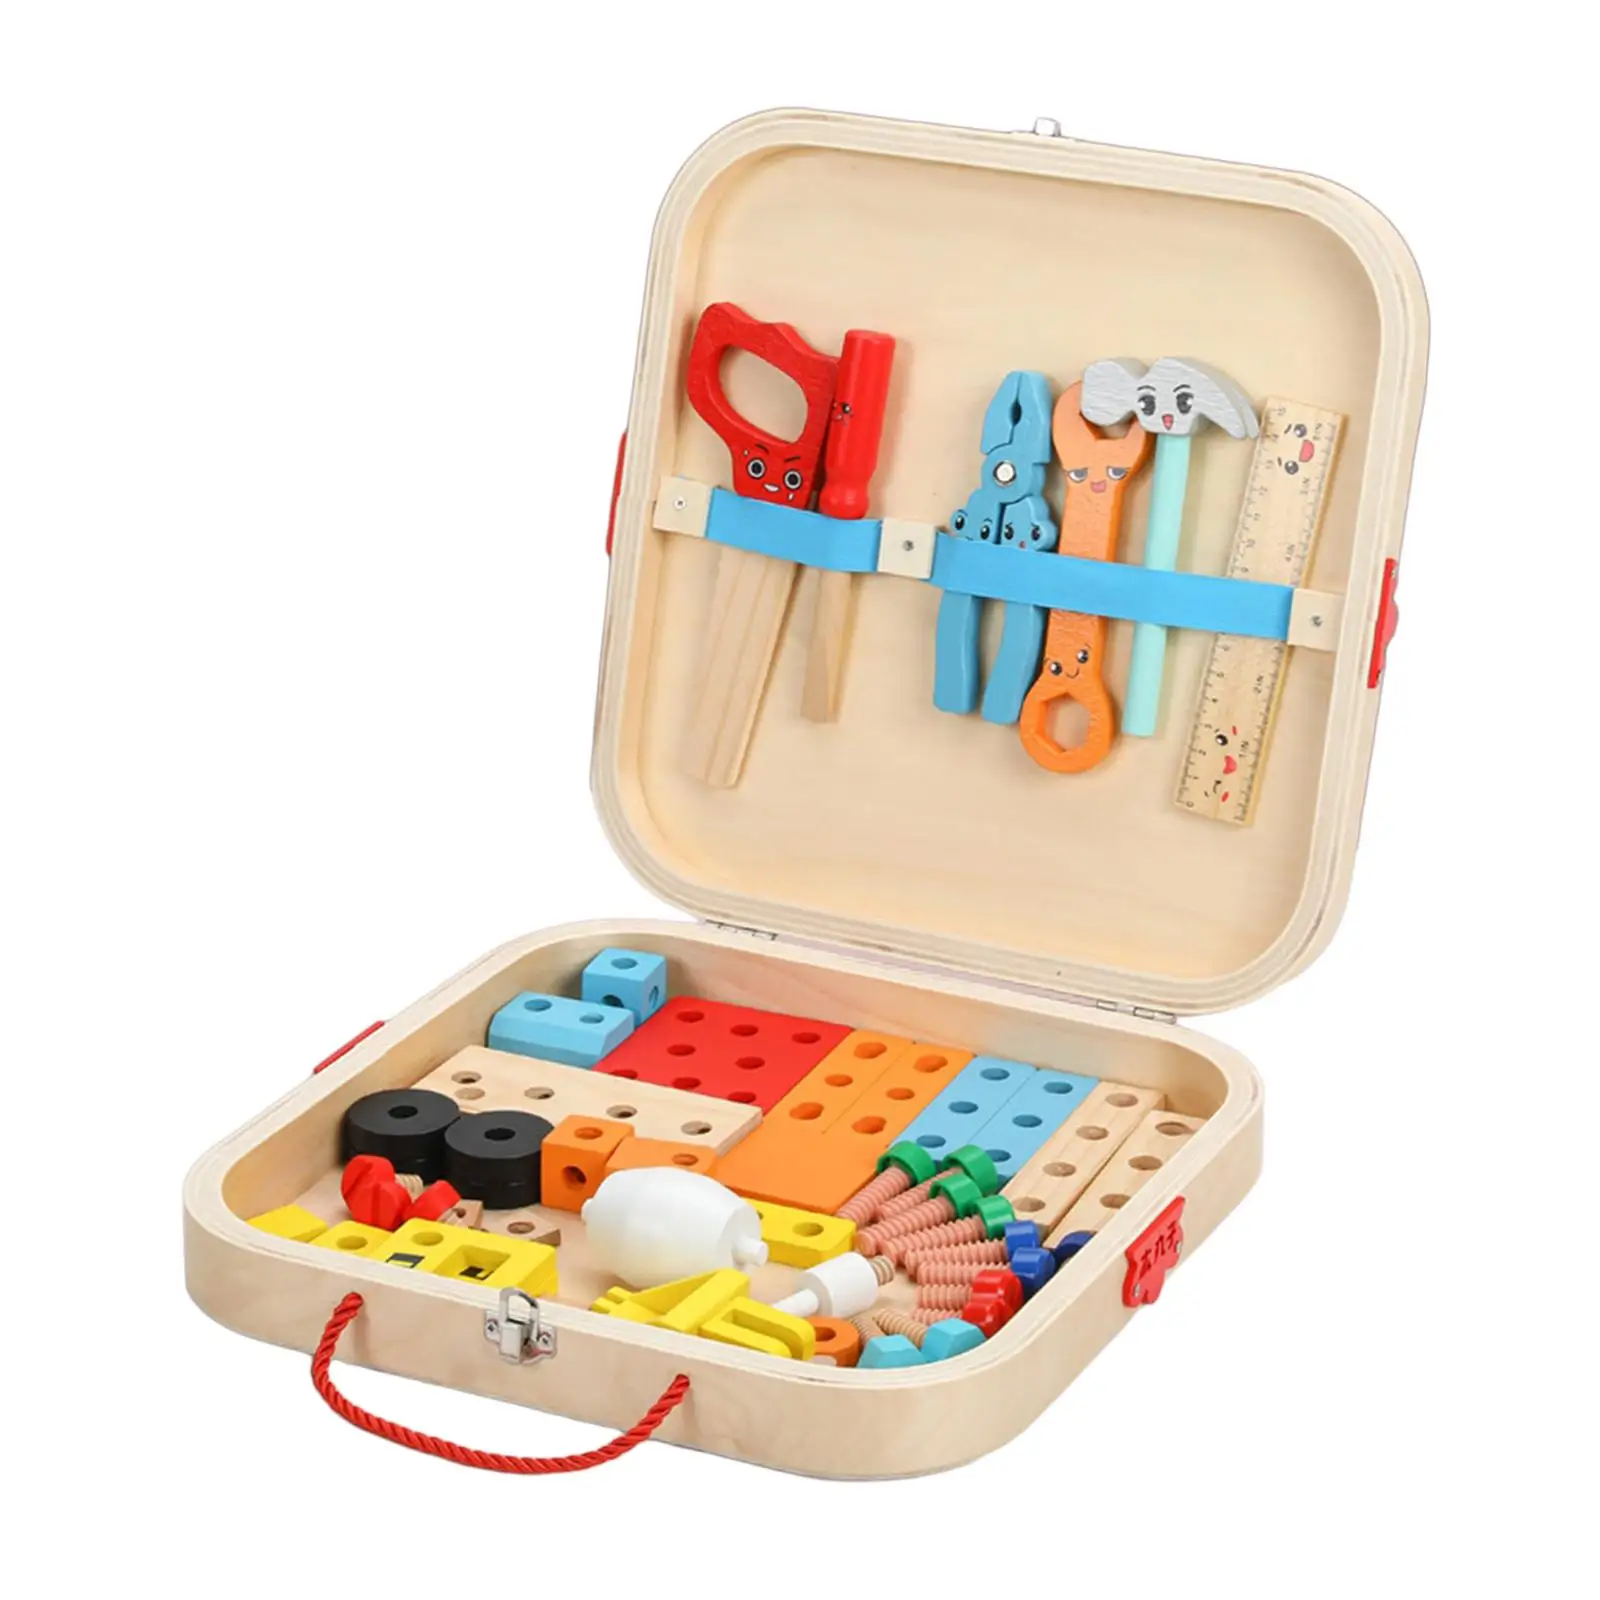 Wooden Kid Tool Set Wooden Toy Tools Box Tool Construction Set Pretend Smooth Construction Tool Toy Set for Living Room